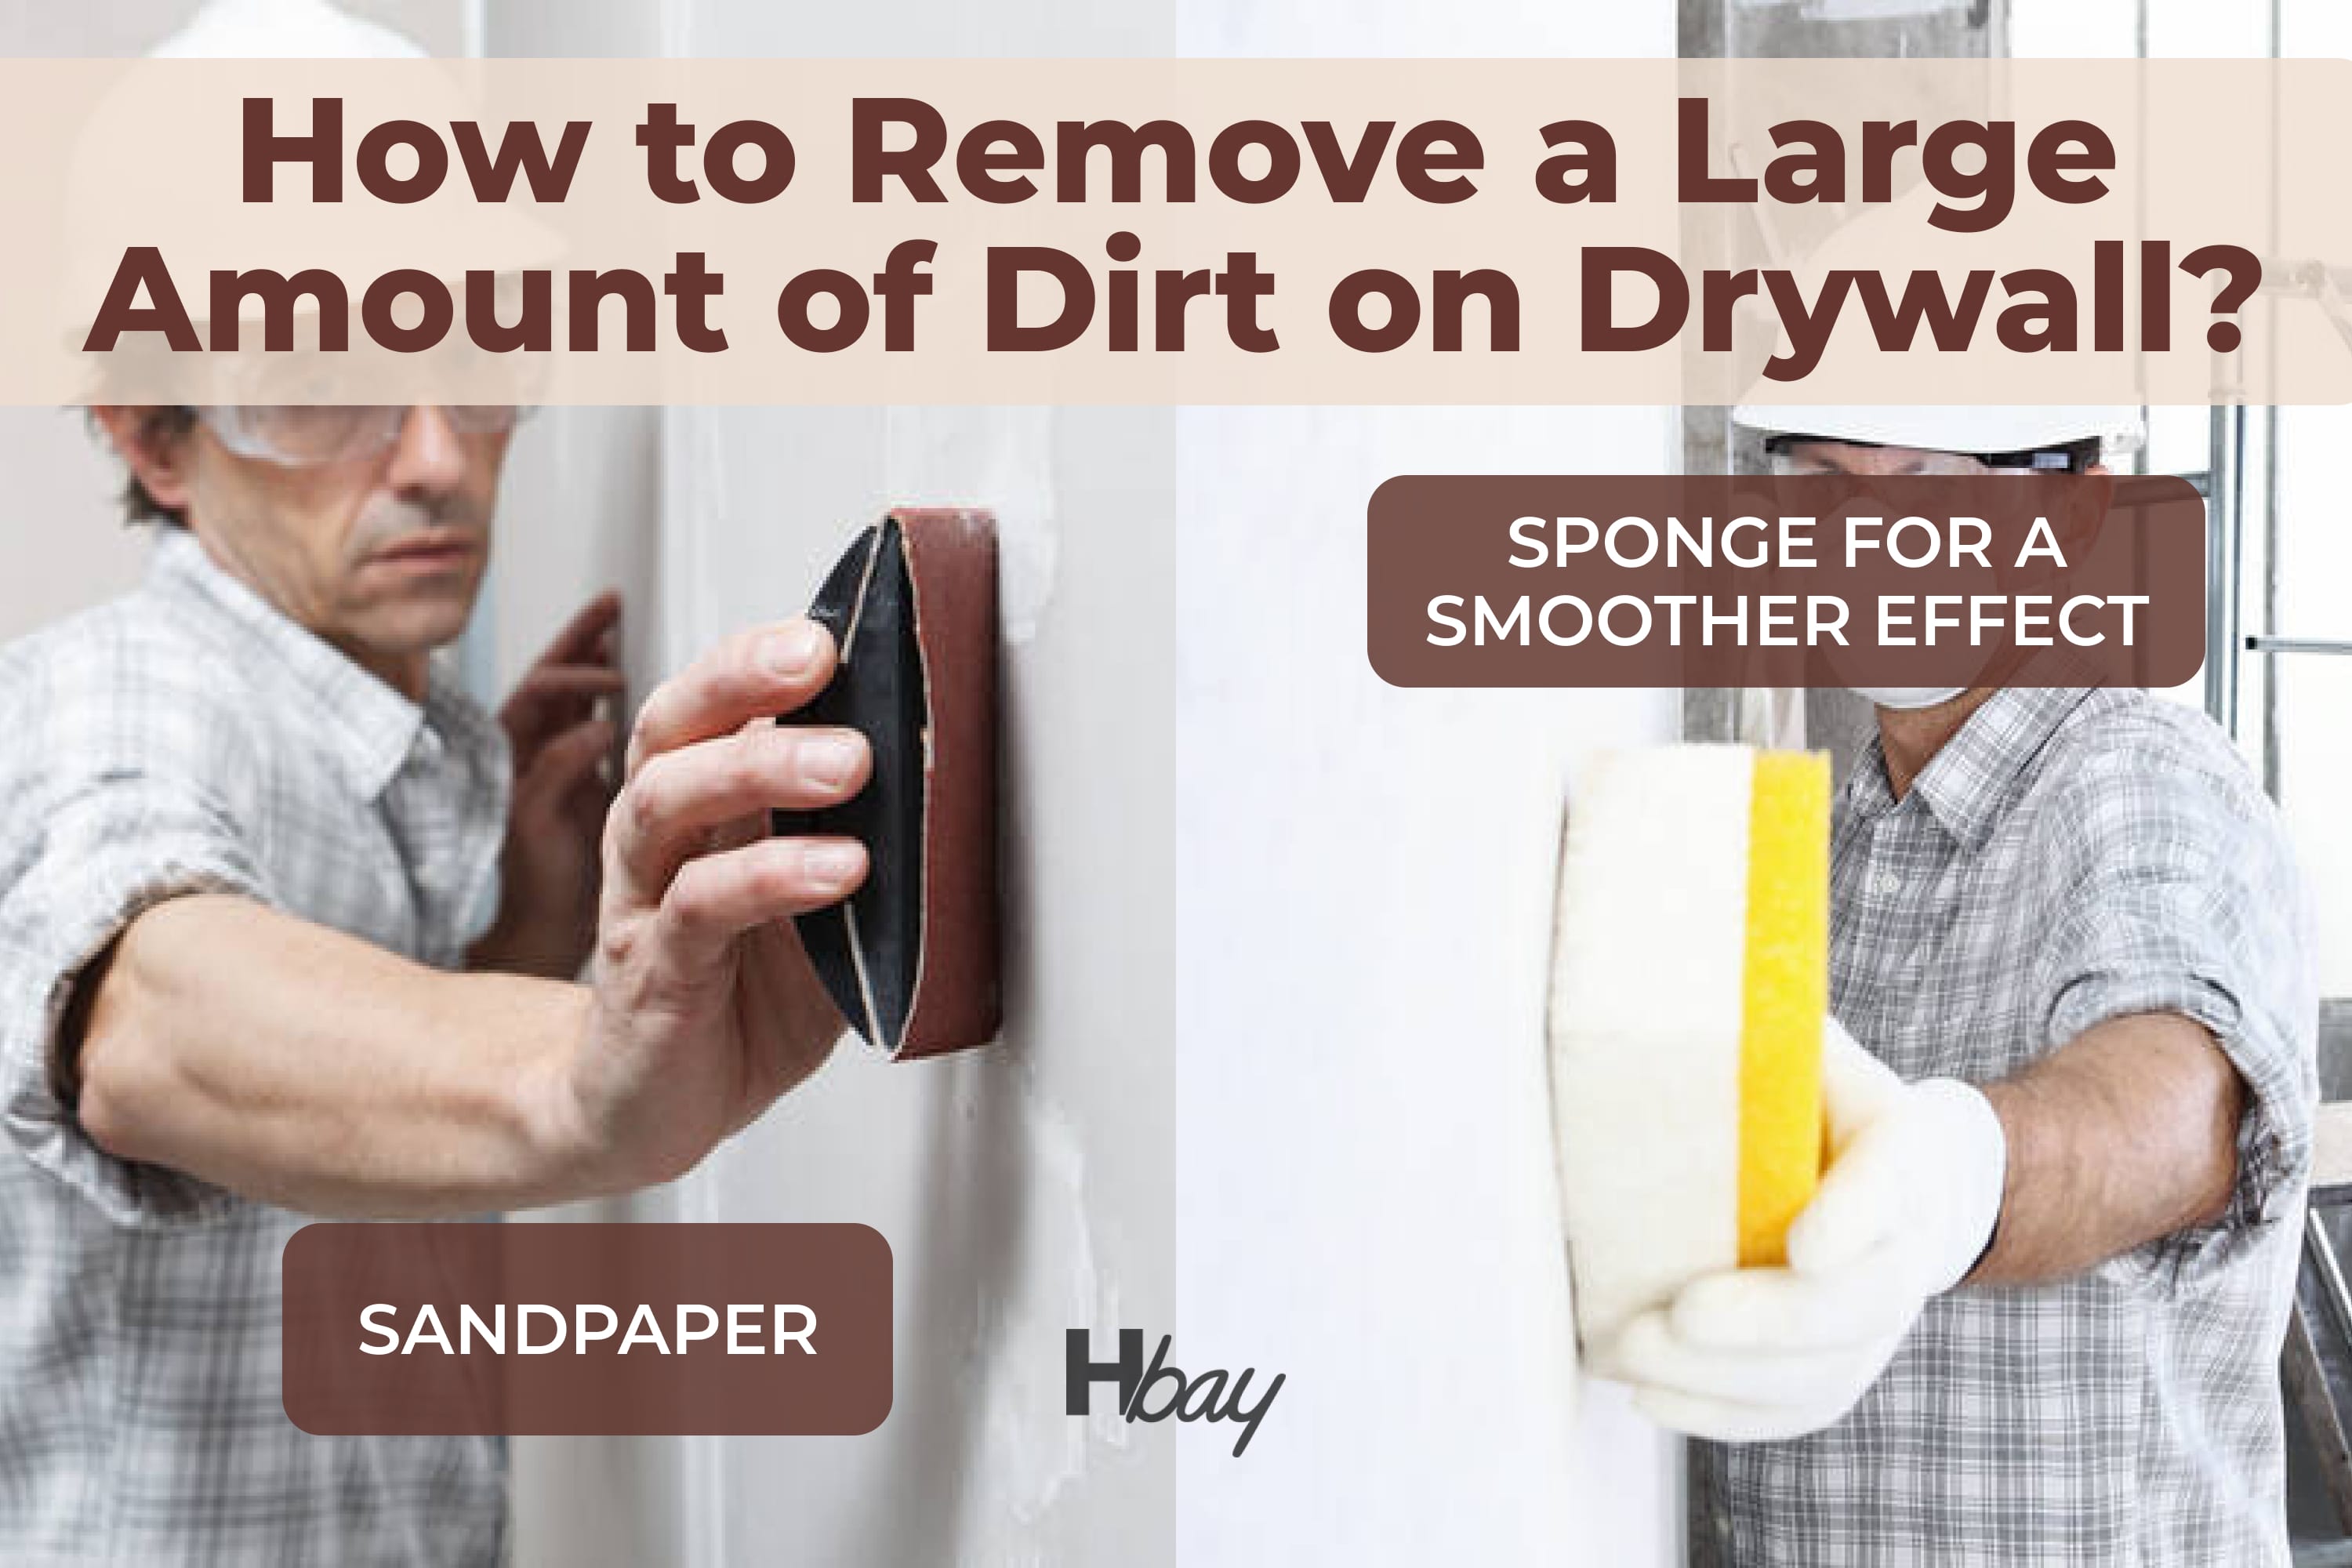 How to remove a large amount of dirt on drywall